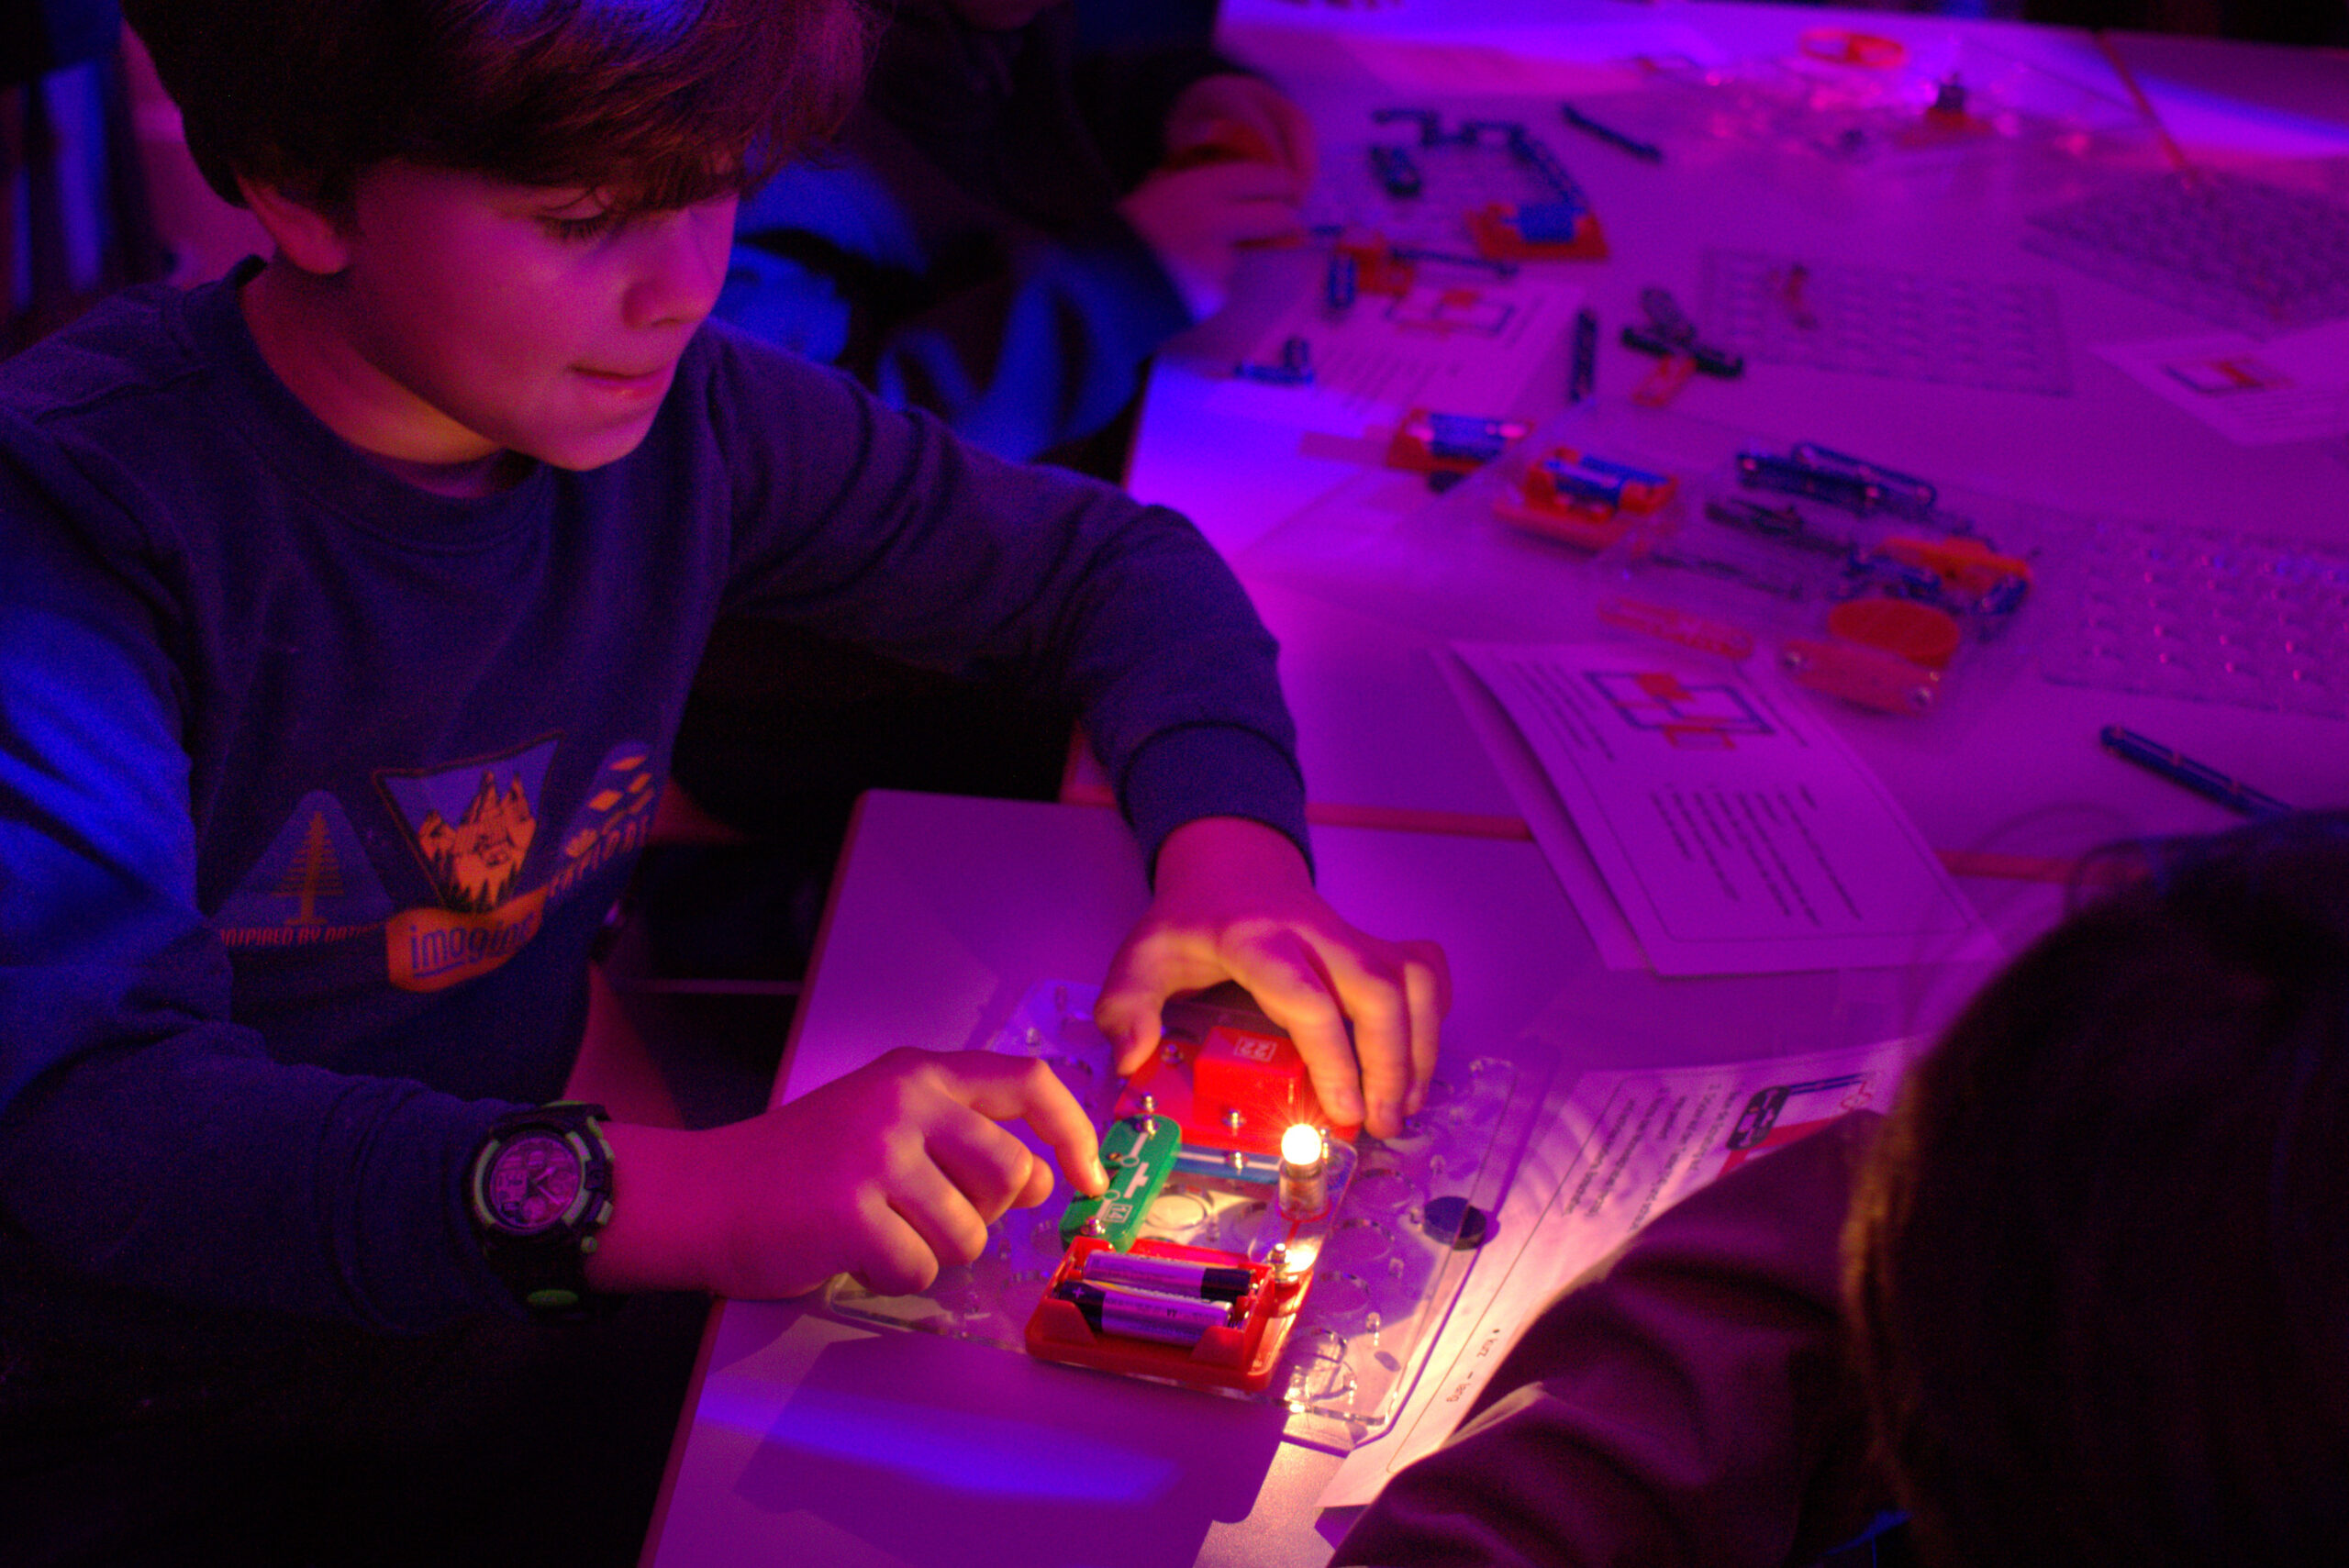 A boy of primary school age operates the switch of a self-made circuit in which a small light bulb lights up